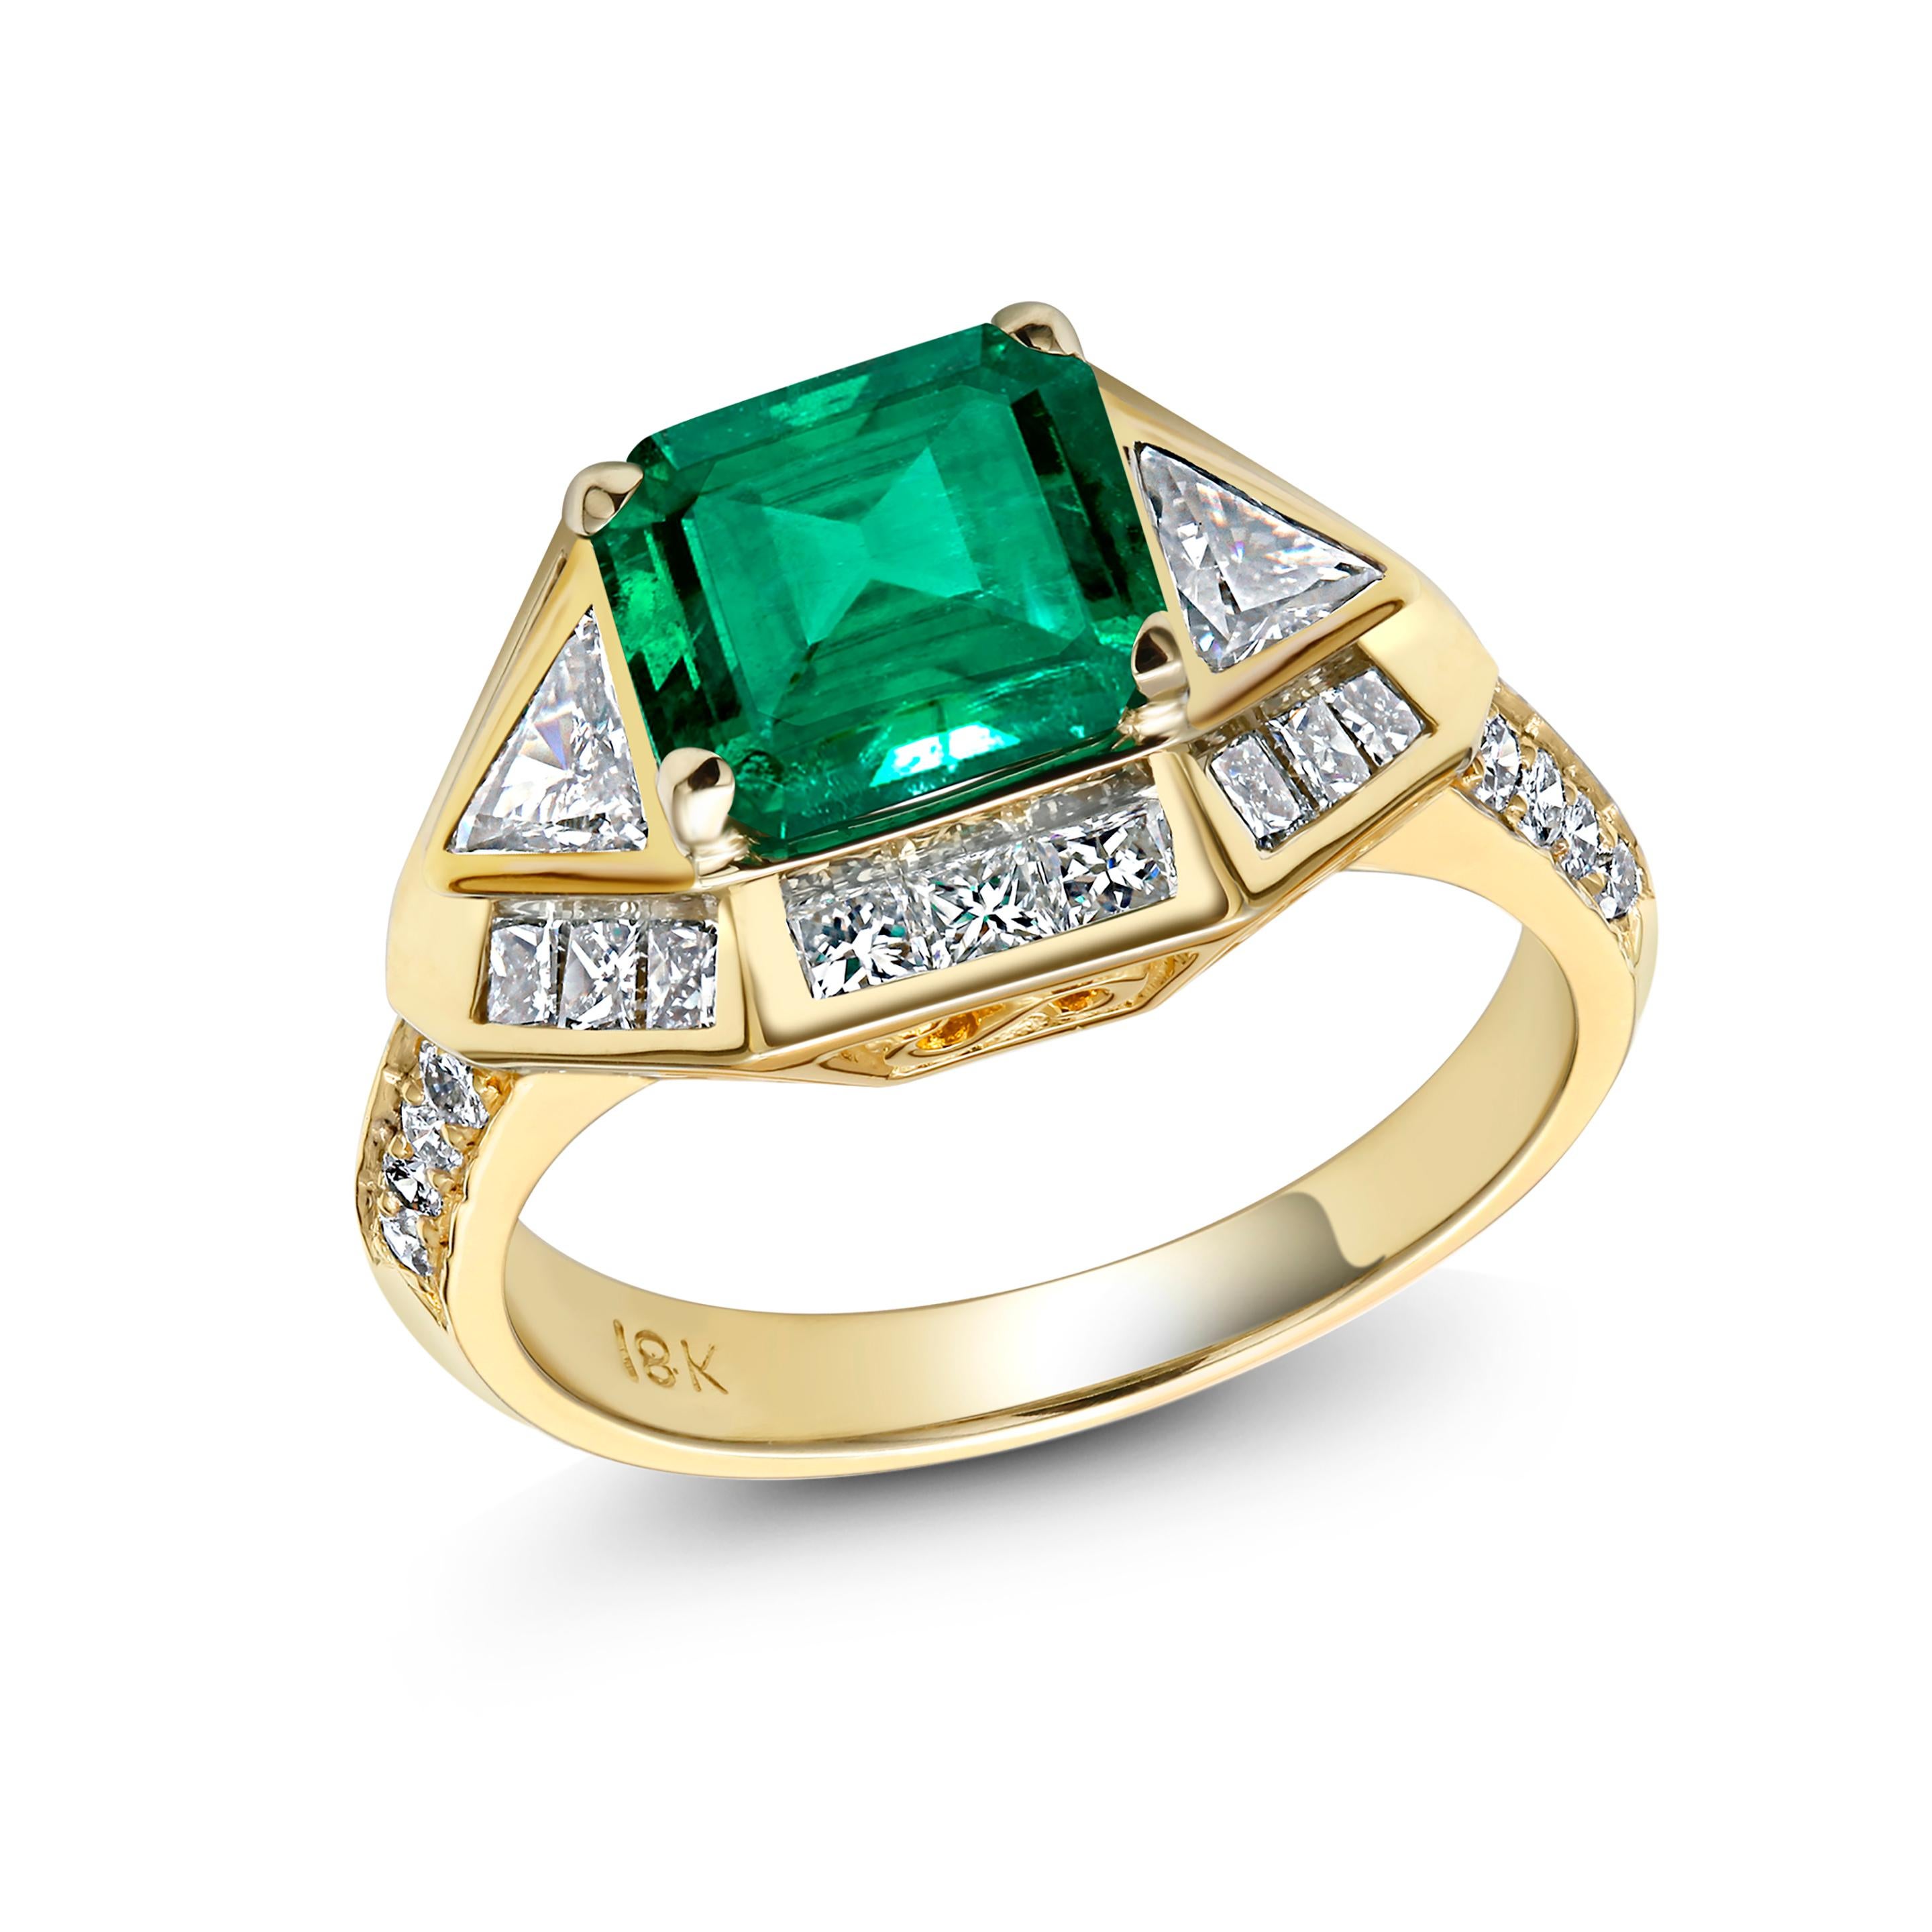 One of a kind eighteen karat yellow gold emerald cut emerald cocktail ring
Emerald weighing 2.32 carat
Princess cut diamond weighing 0.71 carat 
Trillion diamond weighing 0.32 carat
Round diamond weighing 0.22 carat 
Ring size 6 In Stock
Ring can be